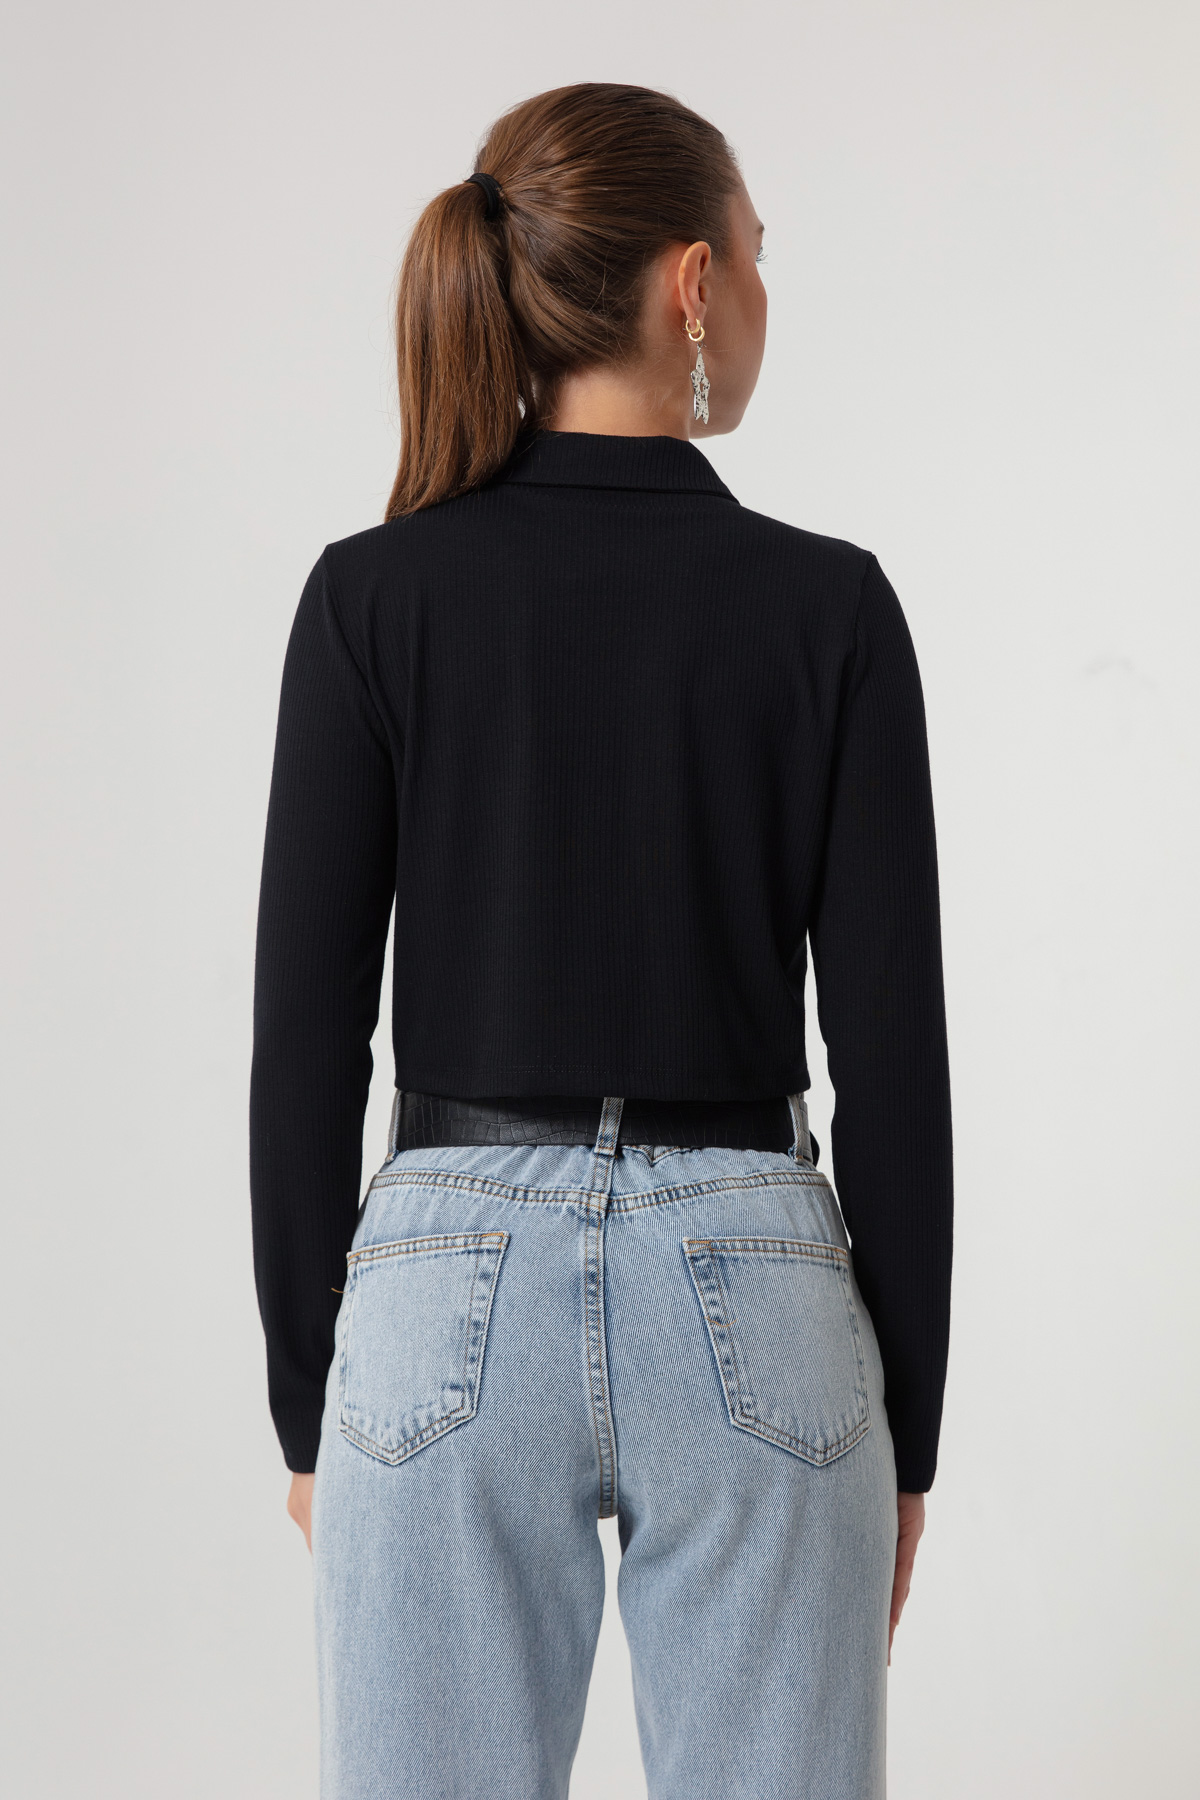 Women's Black Button Knitted Blouse